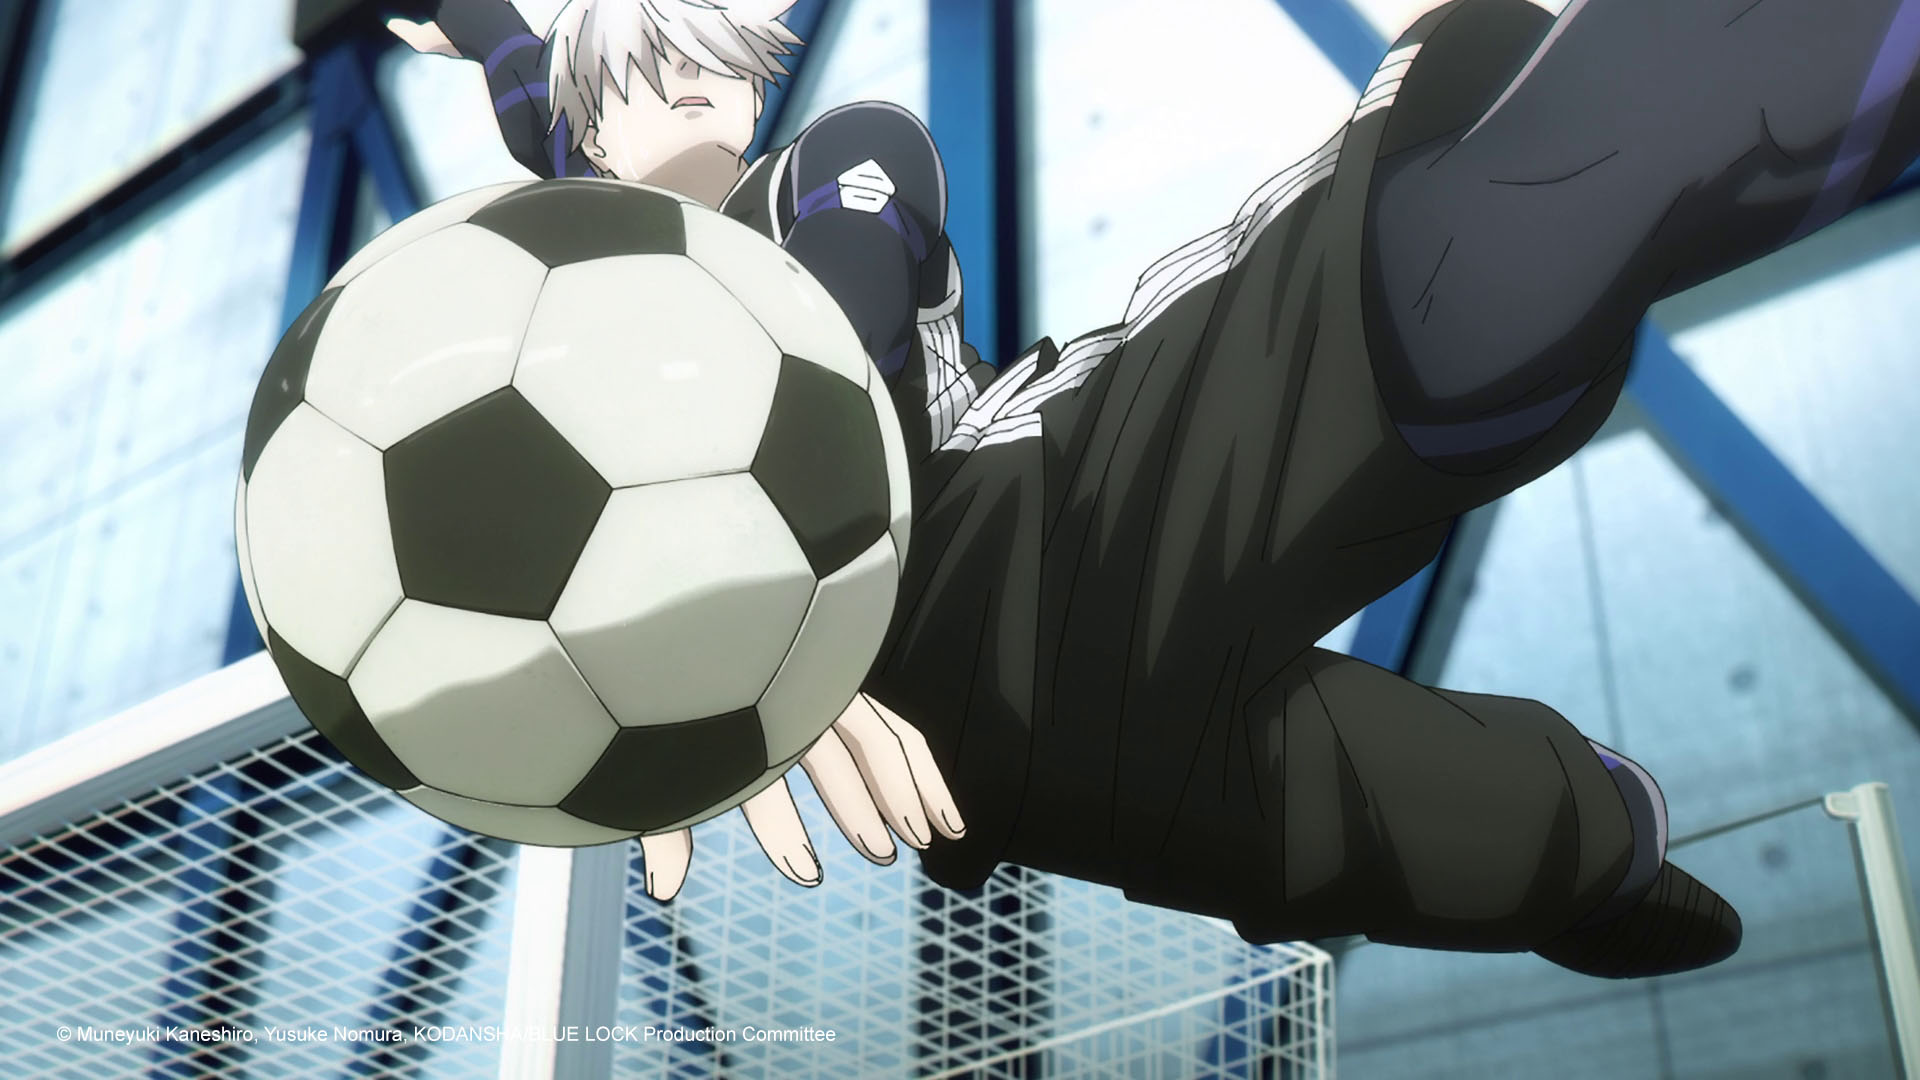 AnimeTV チェーン on X: Ready for Episode 2 of BLUELOCK on Crunchyroll  Tomorrow?! 👀⚽️ ✨More:   / X